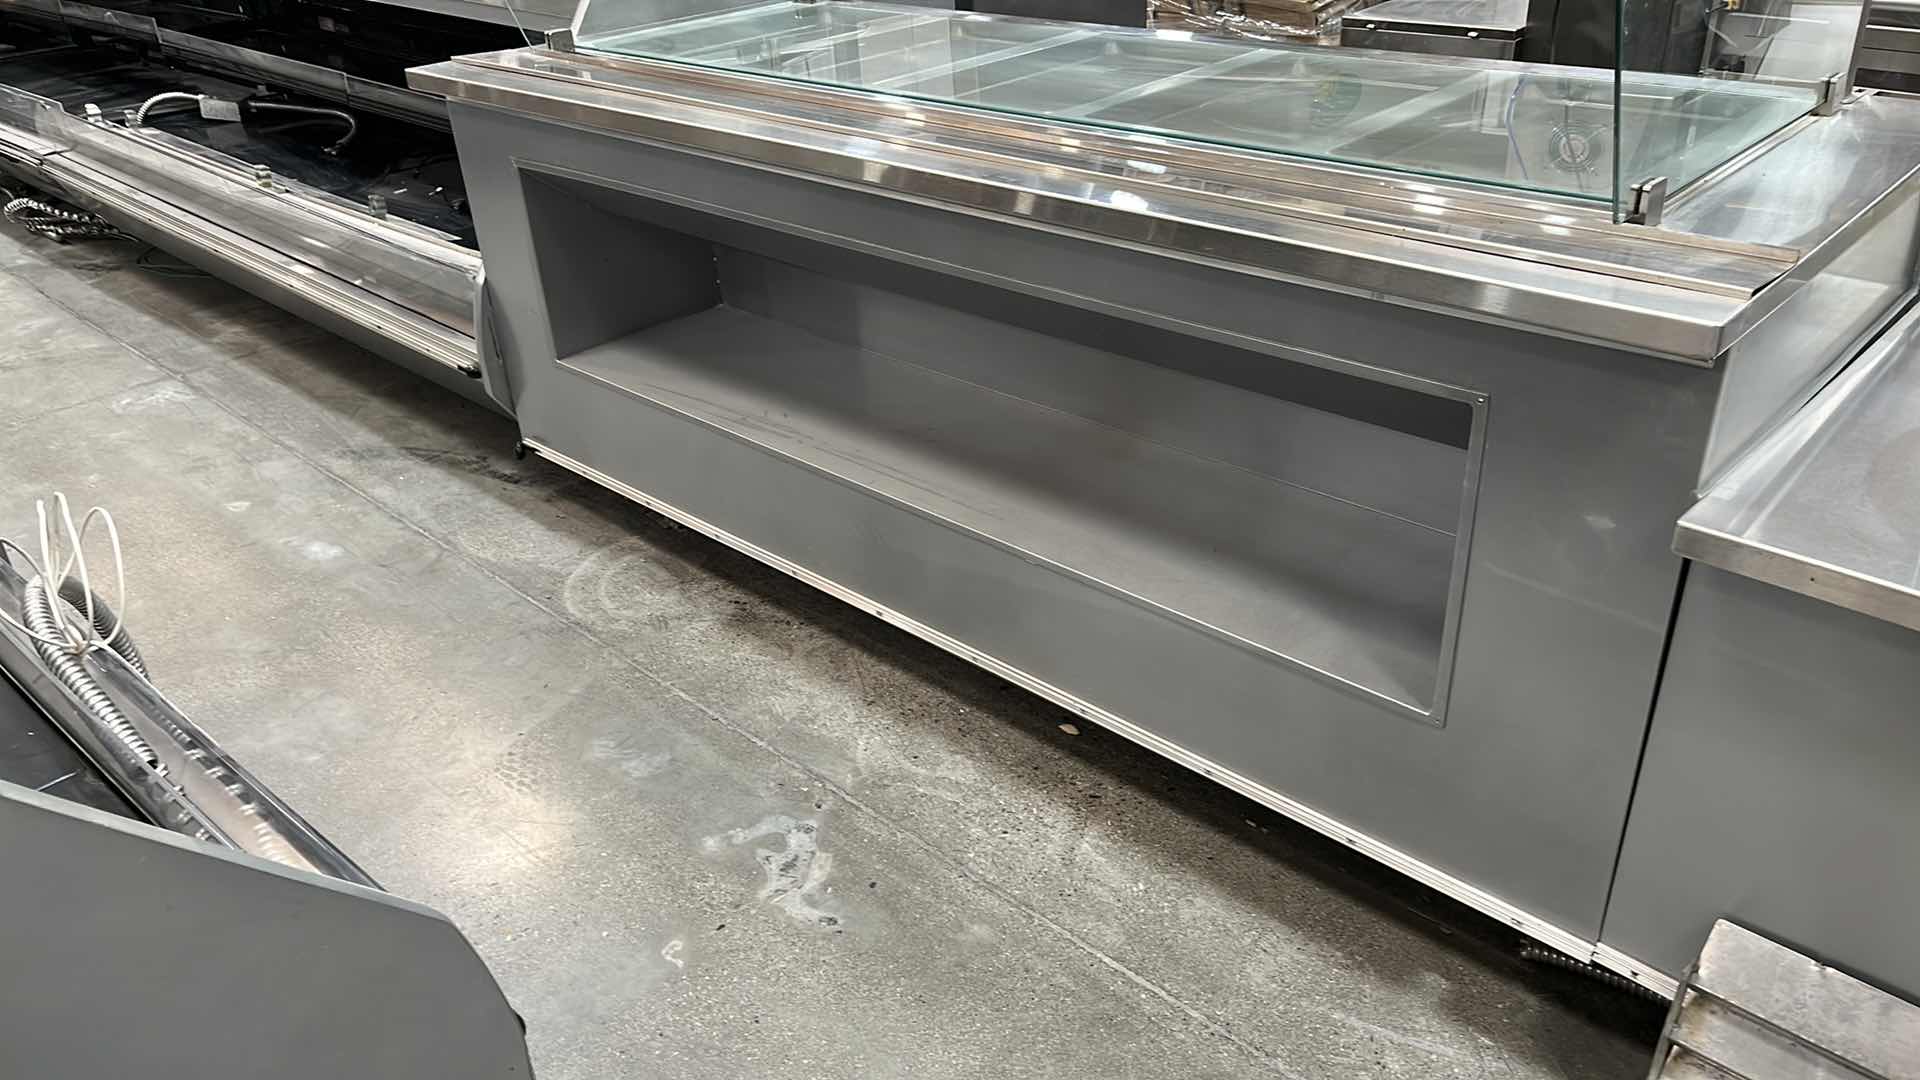 Photo 4 of HUSSMANN COMMERCIAL SELF-SERVICE FOOD COUNTER W HOT WELLS MODEL IM-05-I7-FH